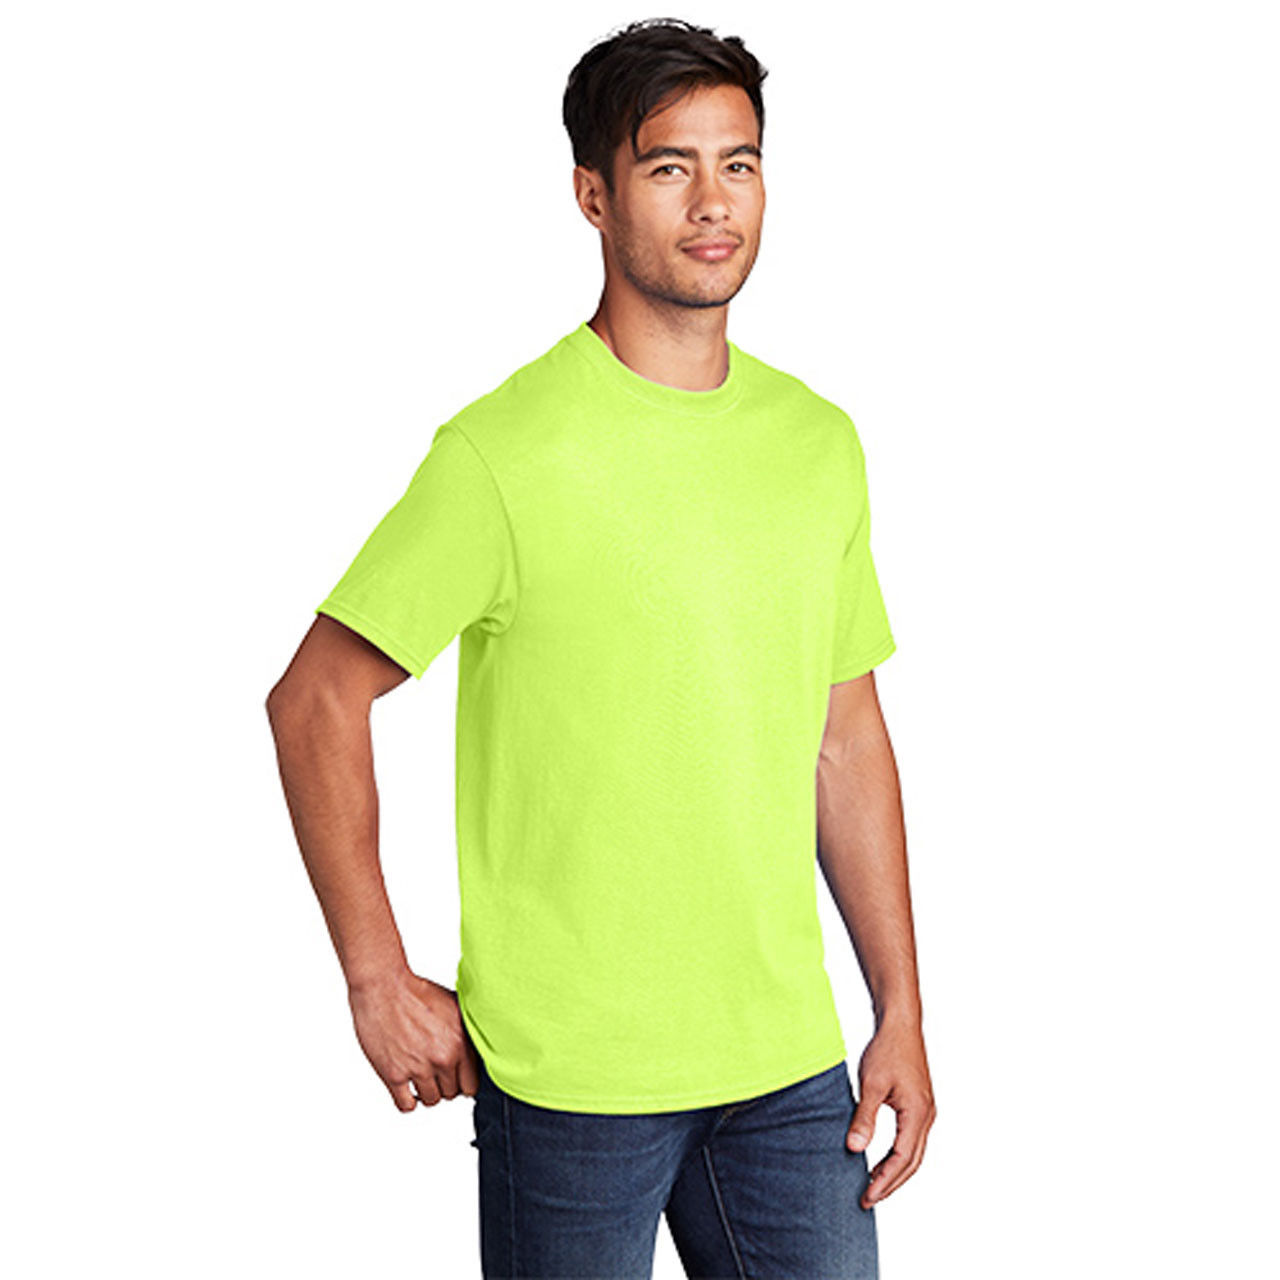 Where are the bulk neon shirts made?